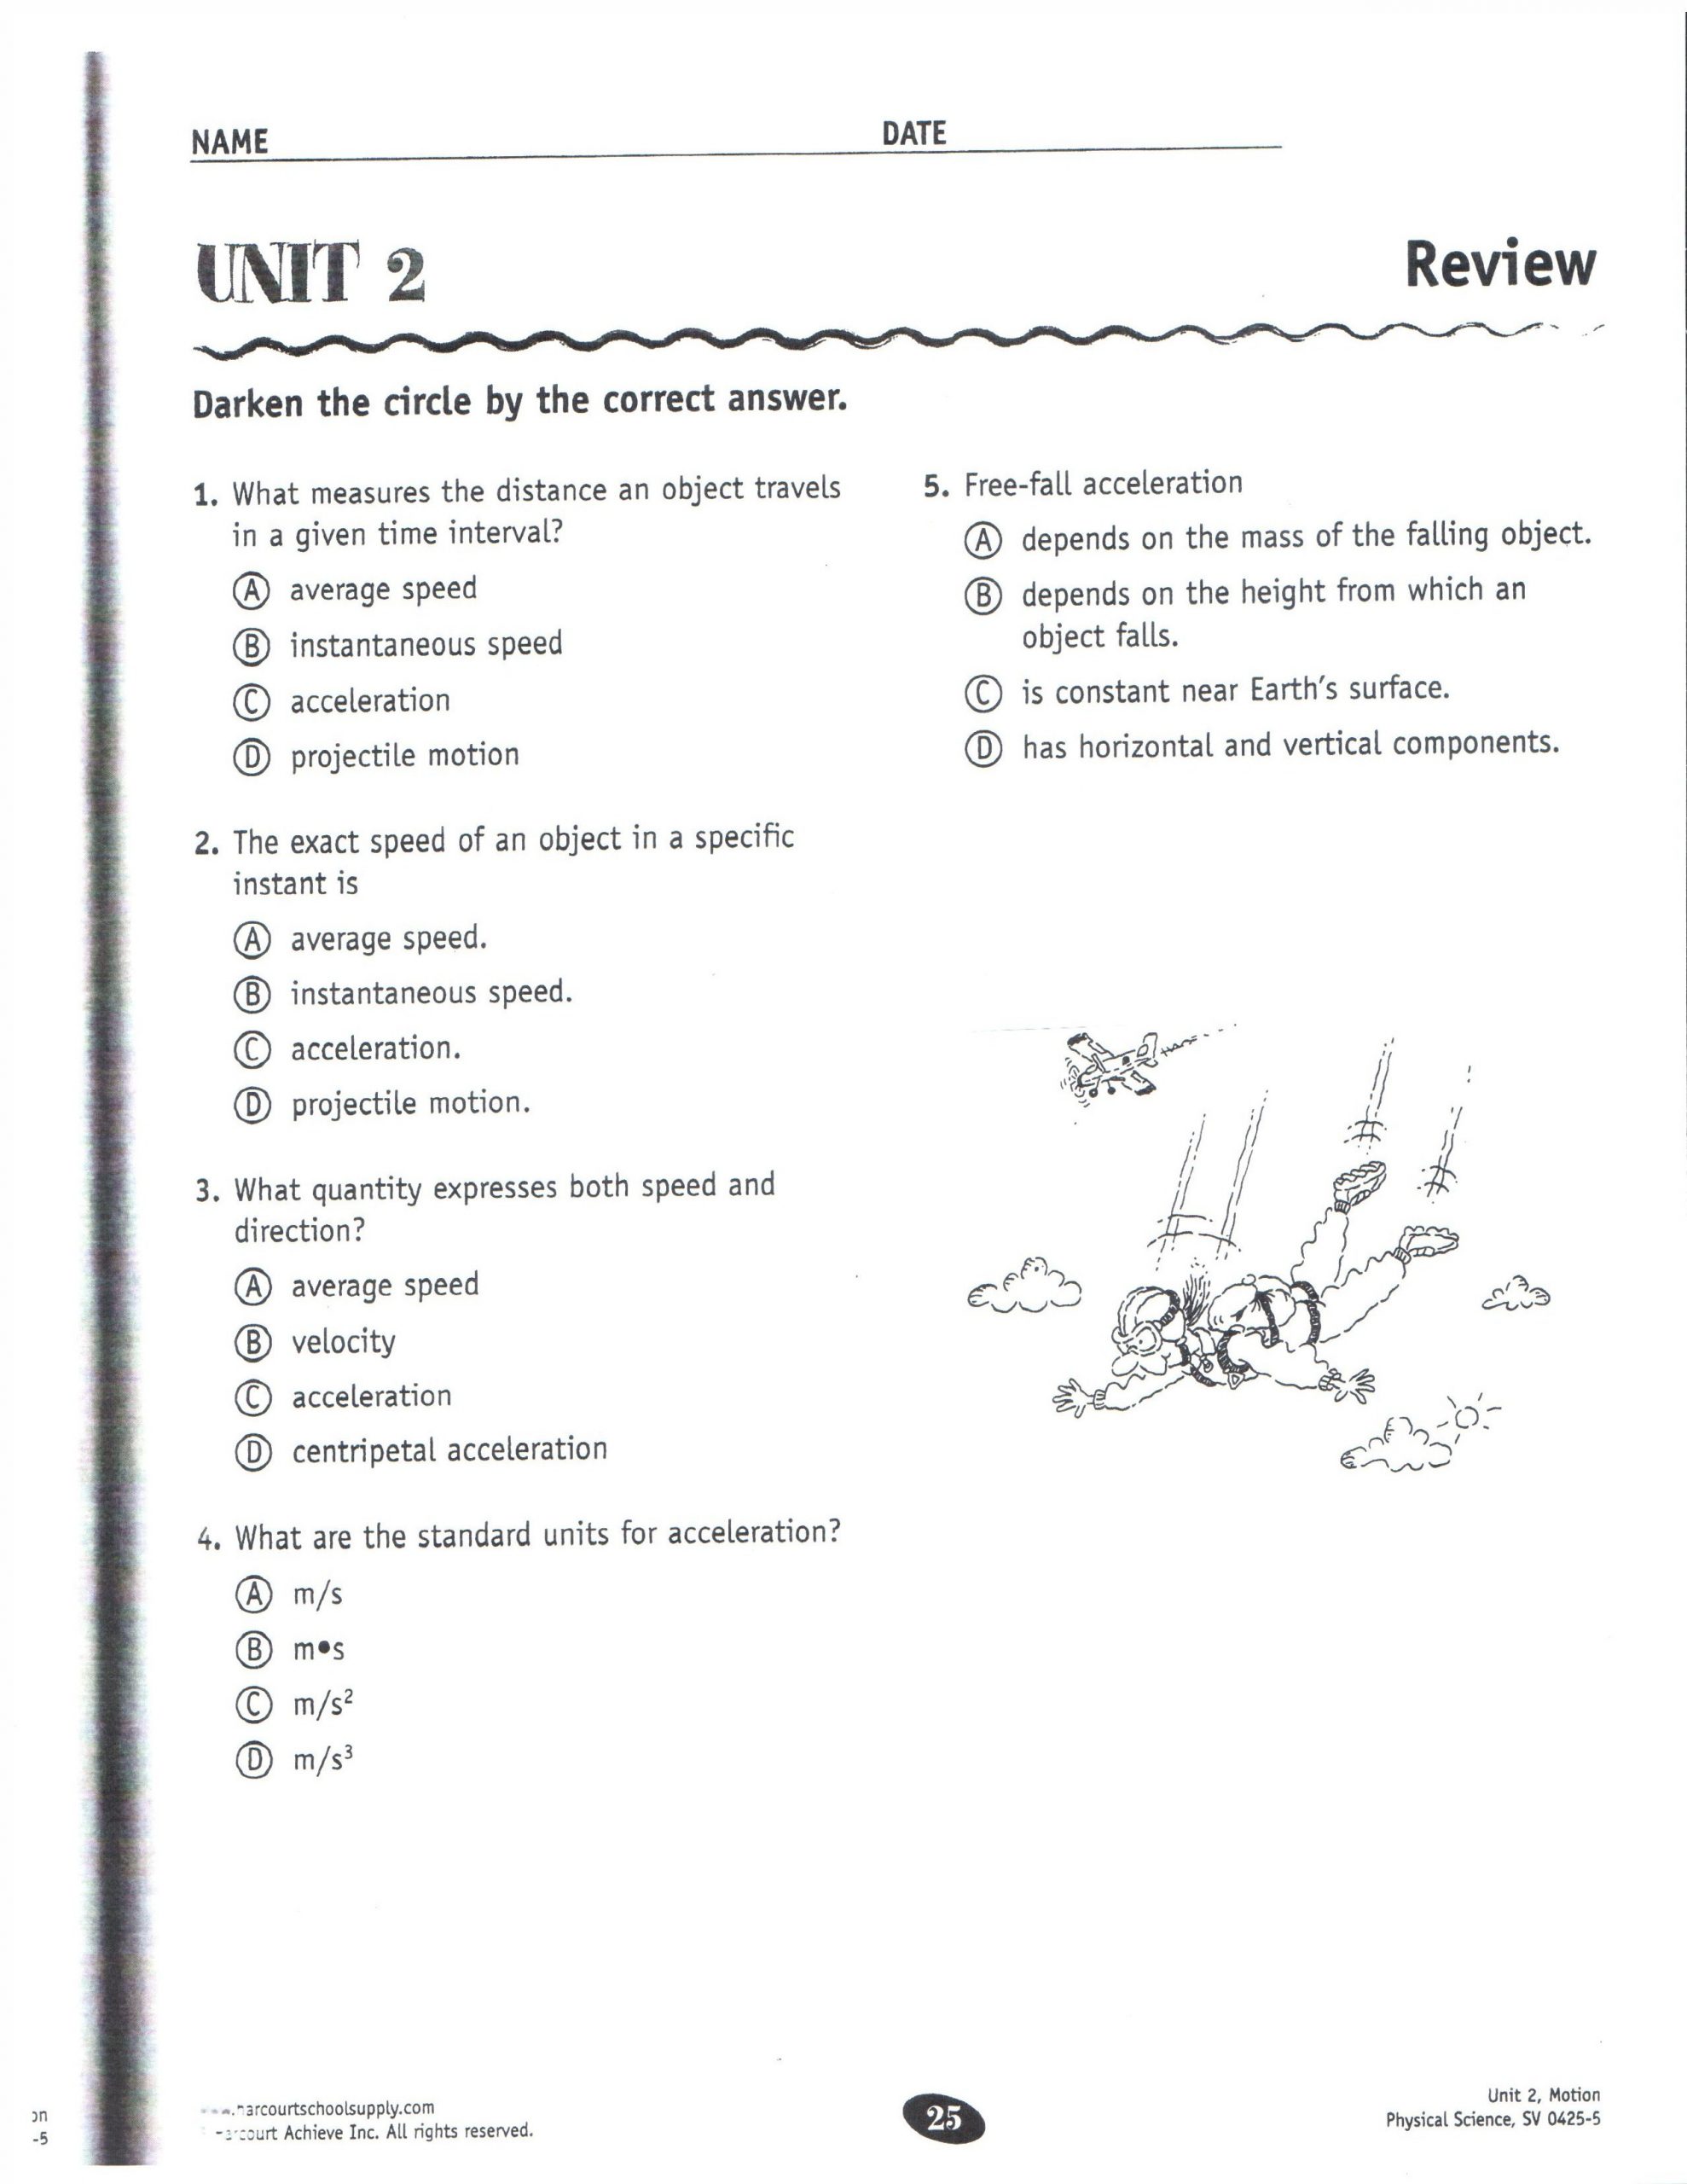 Forces and Motion Worksheet 34 Physical Science Motion and forces Worksheet Answers